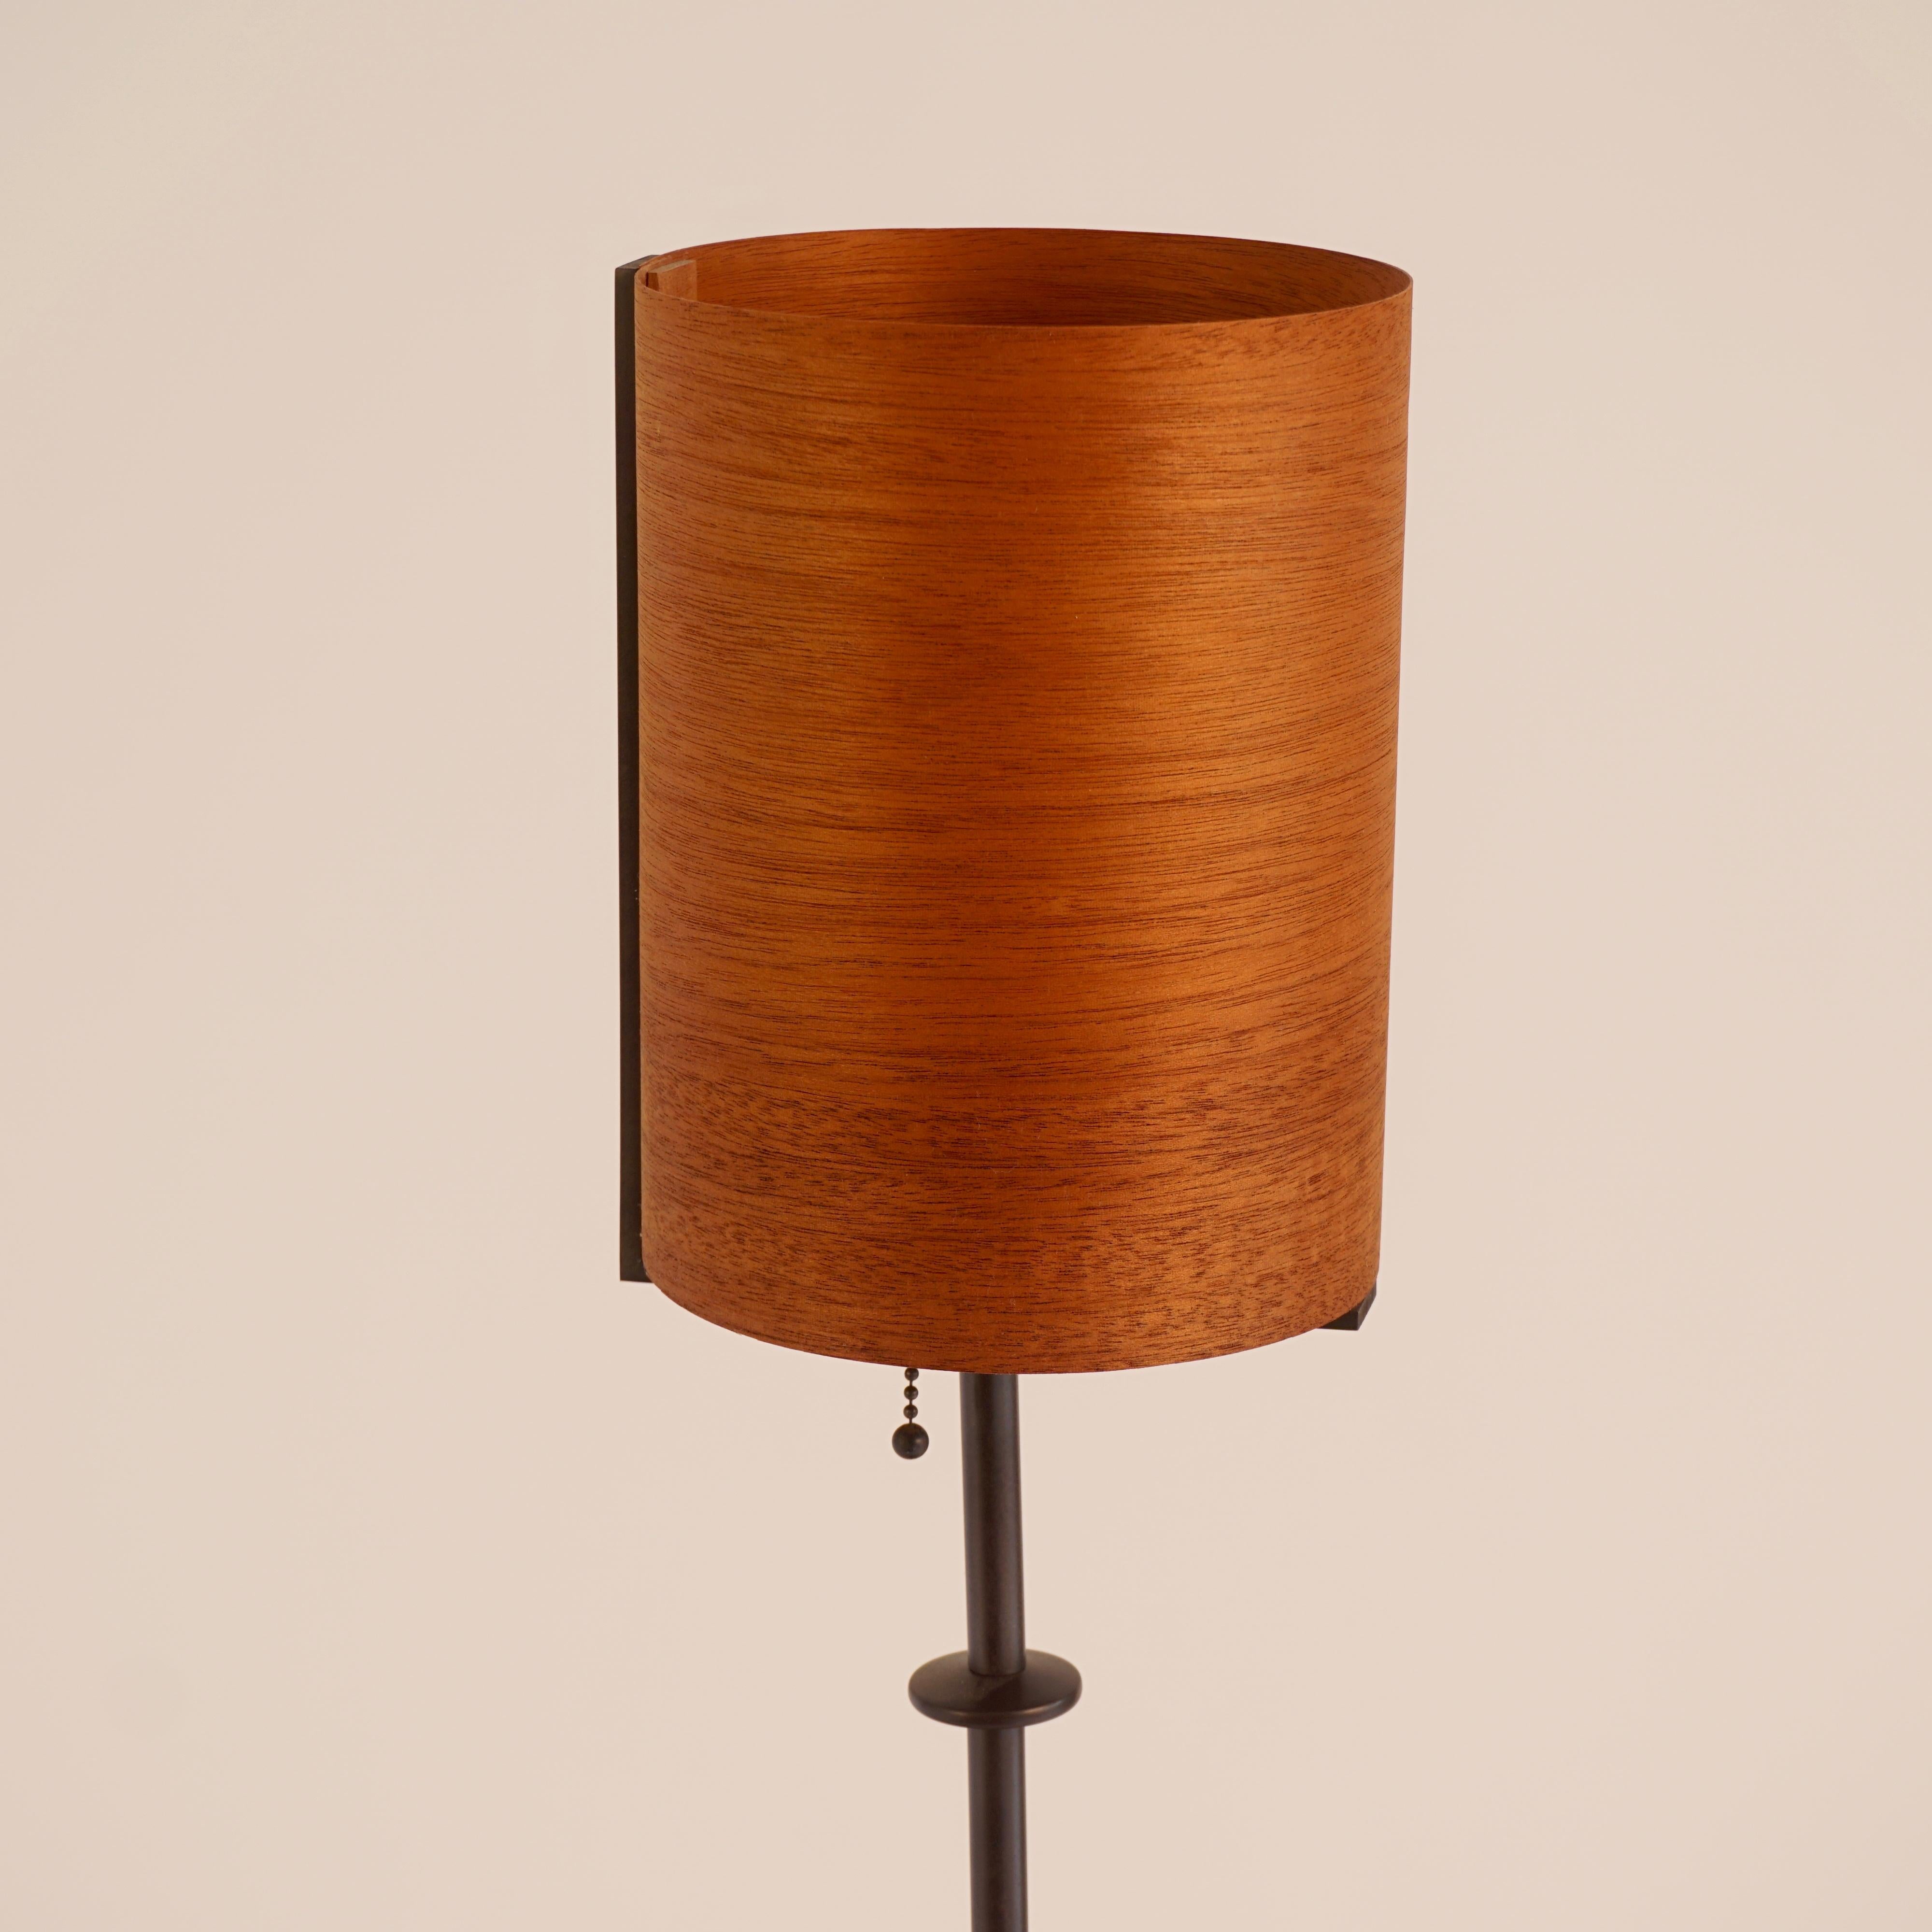 Mahogany Wood Veneer Table Lamp #2 with Blackened Bronze Frame For Sale 1